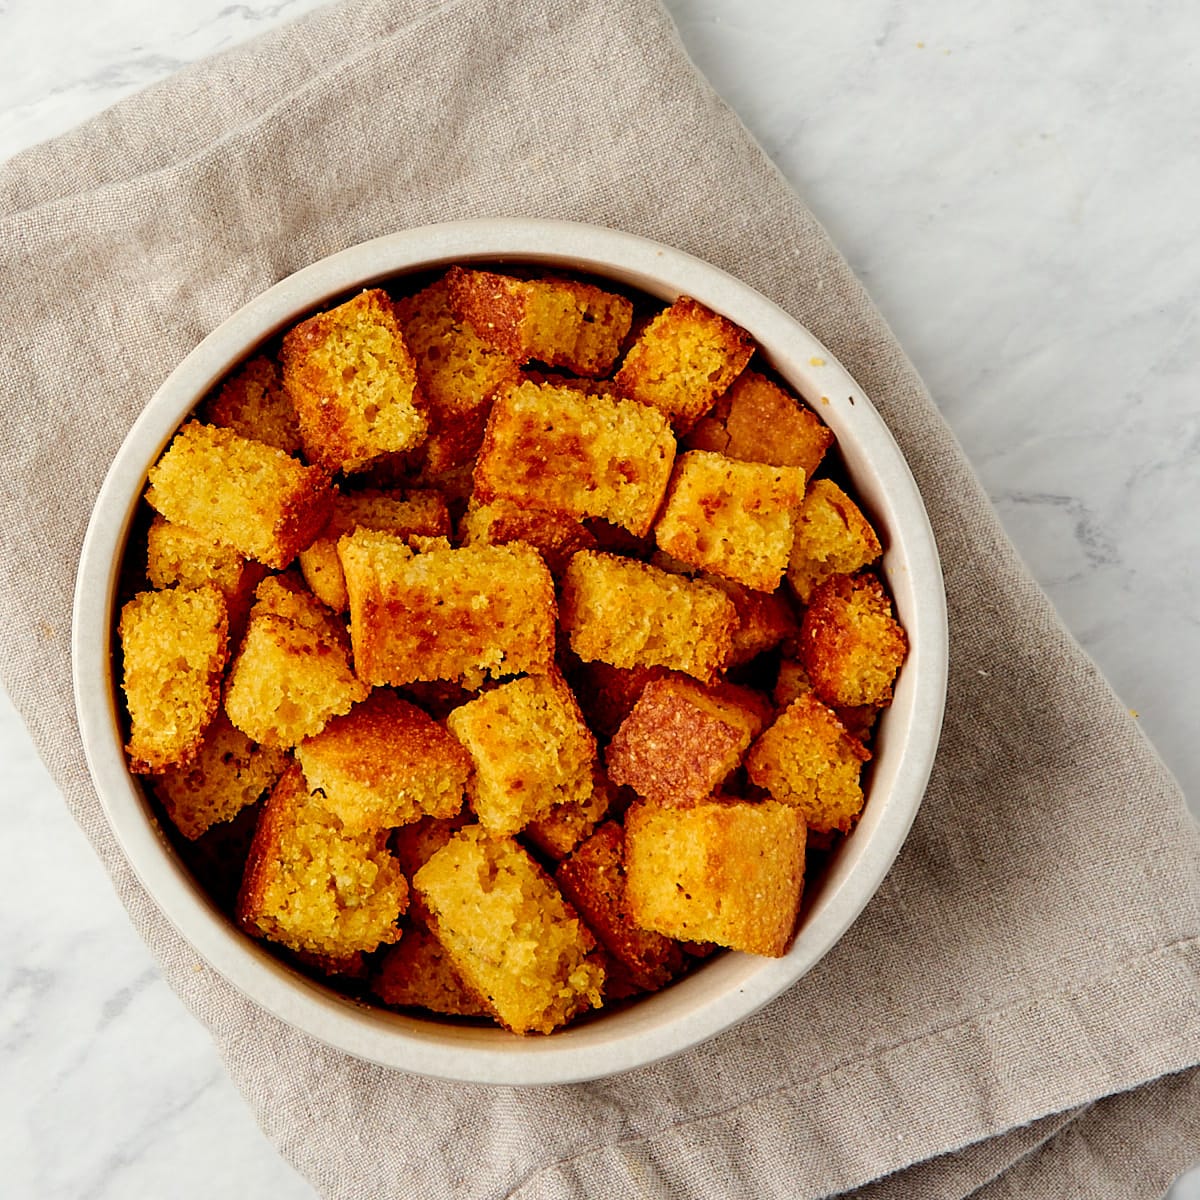 cornbread croutons in a bowl.